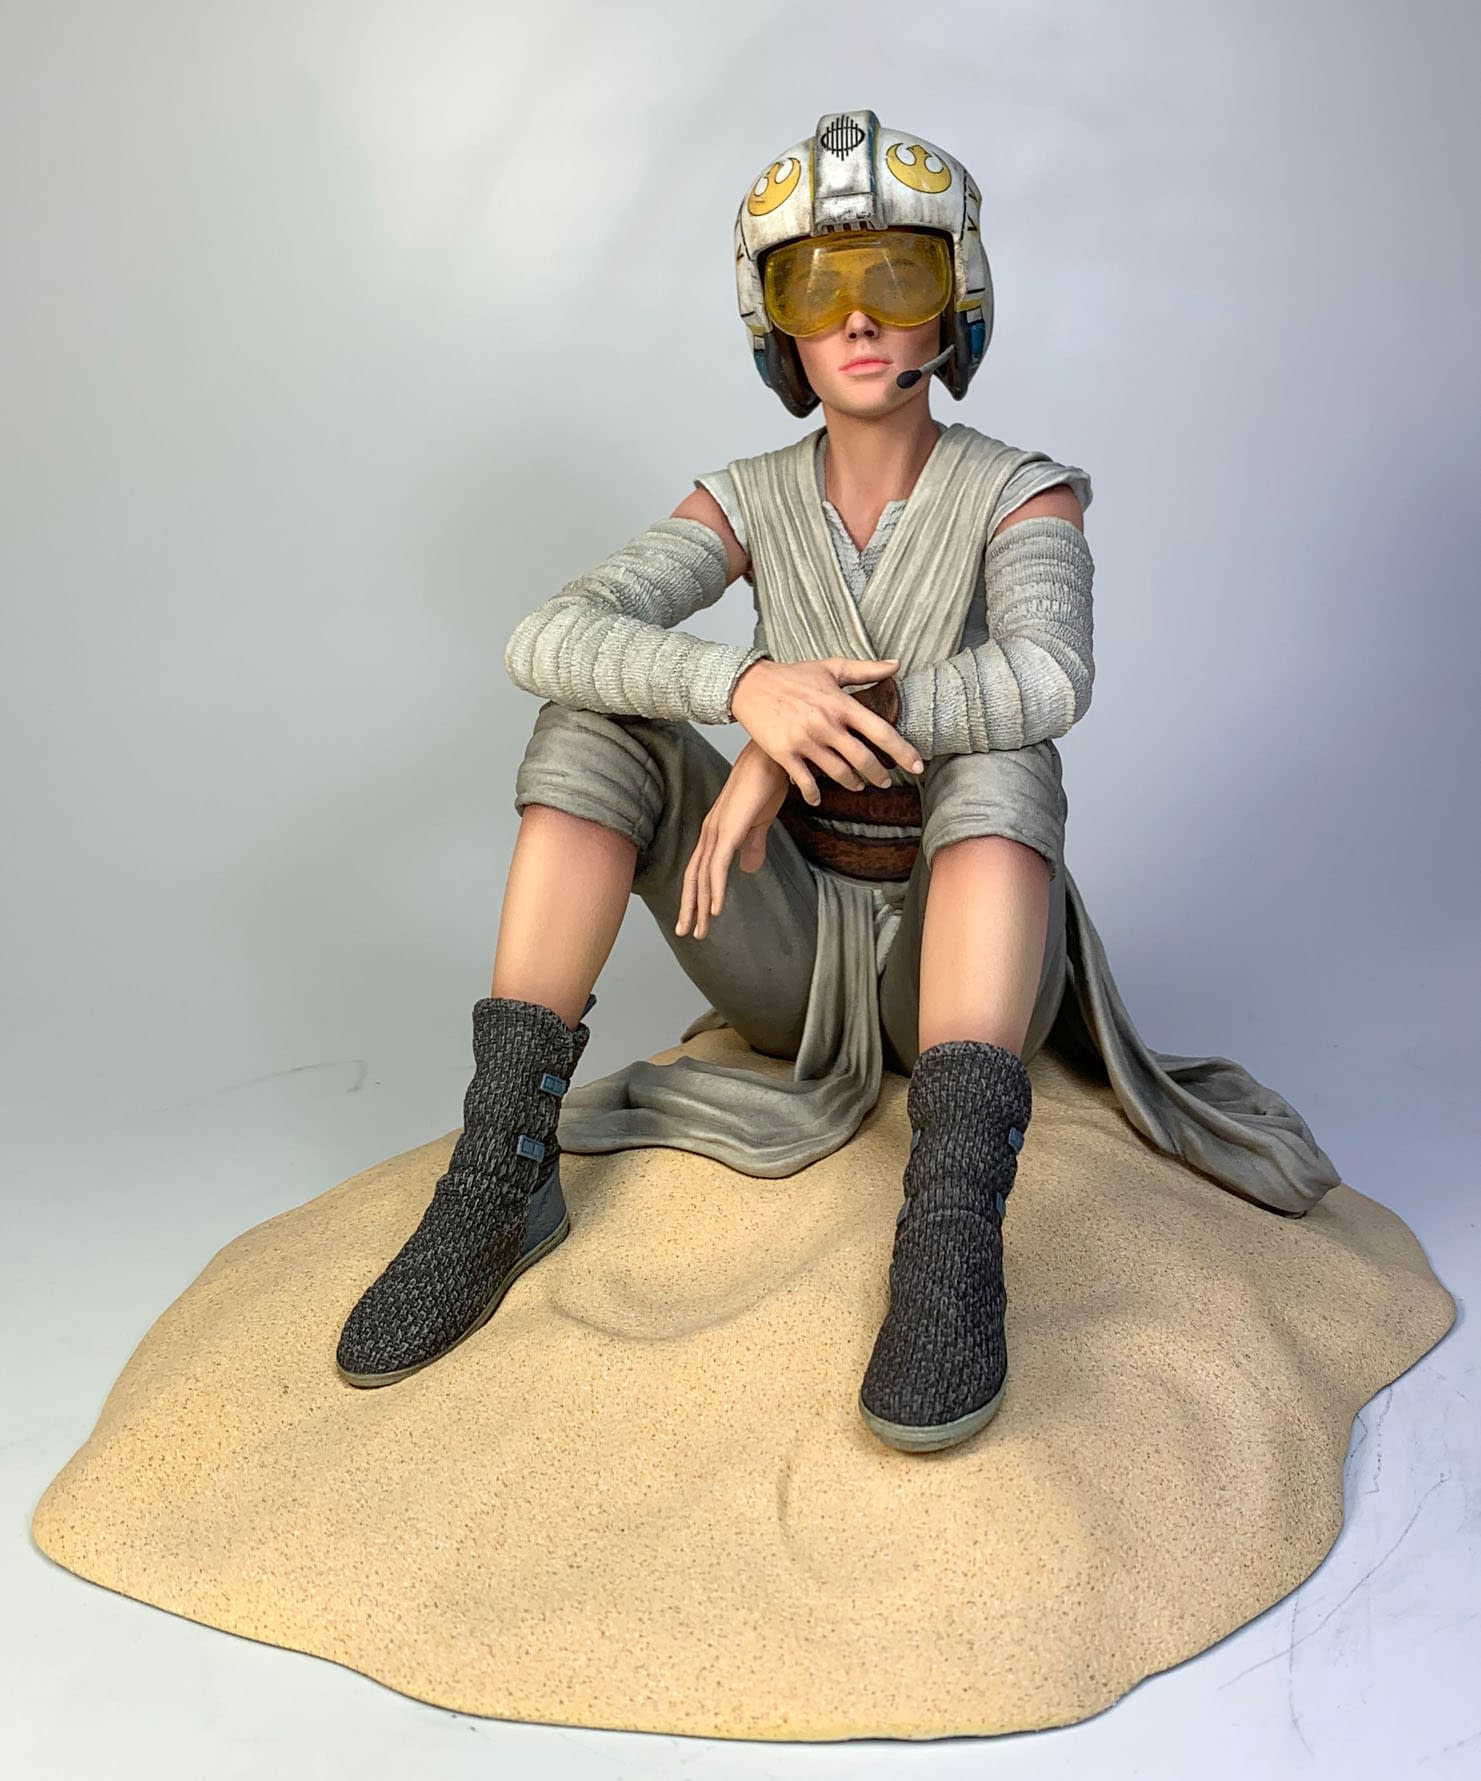 Rey Warms Our Hearts in New Exclusive Star Wars Gentle Giant Statue 